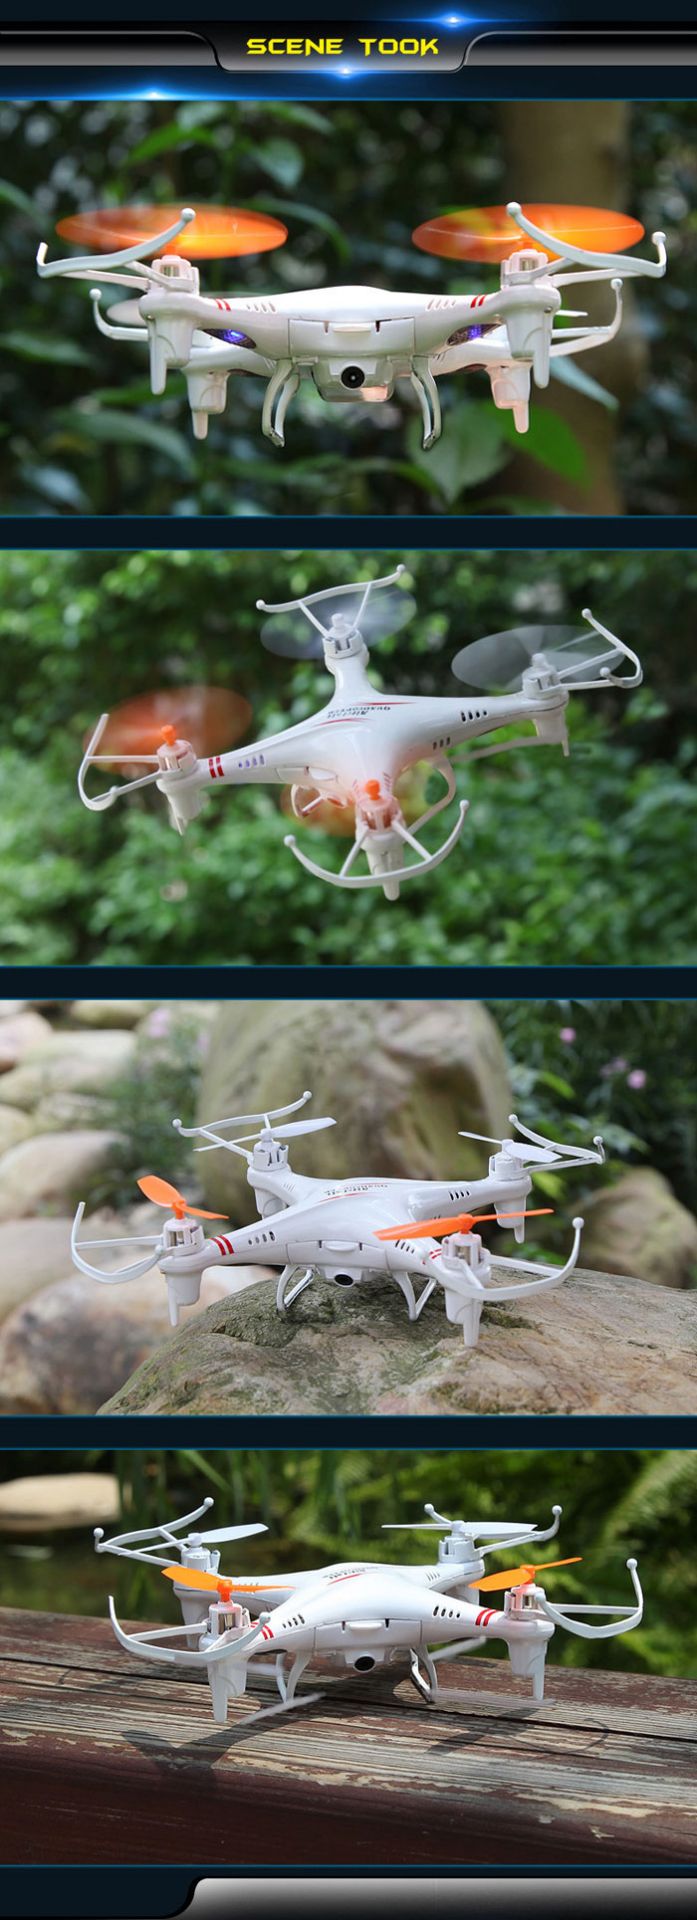 SKYTEC RC QUADCOPTER 4 CHANNEL 6 AXIS 2.4Ghz BNIB BRAND NEW IN BOX Control Helicopters, also refered - Image 2 of 13